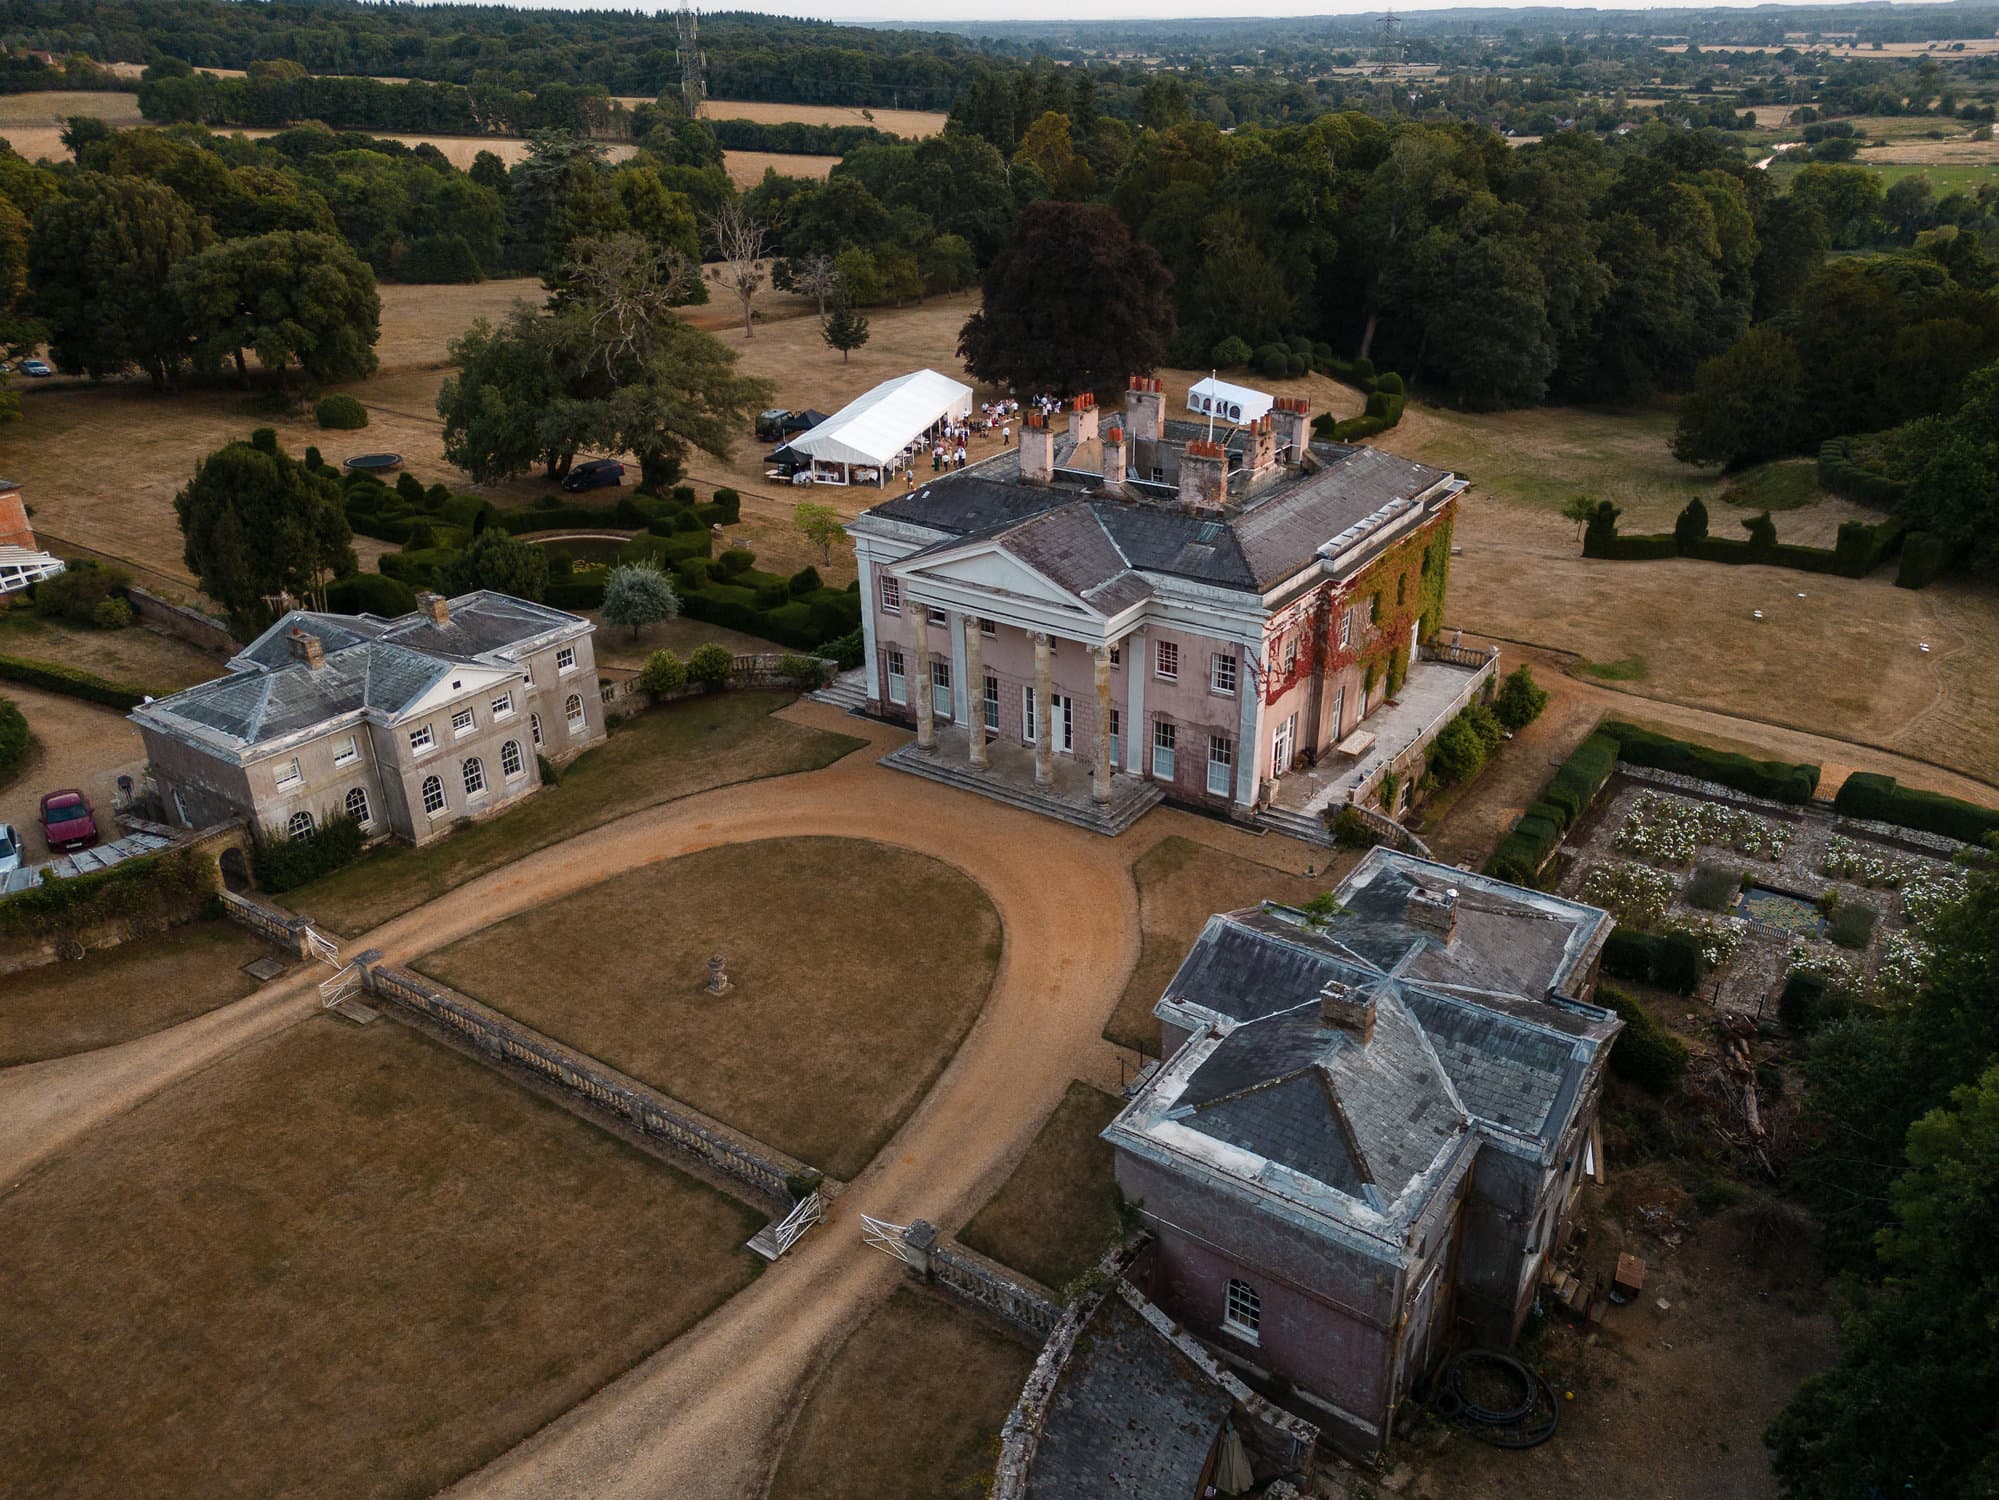 Dorset wedding venue - Hale Park photographed from the air